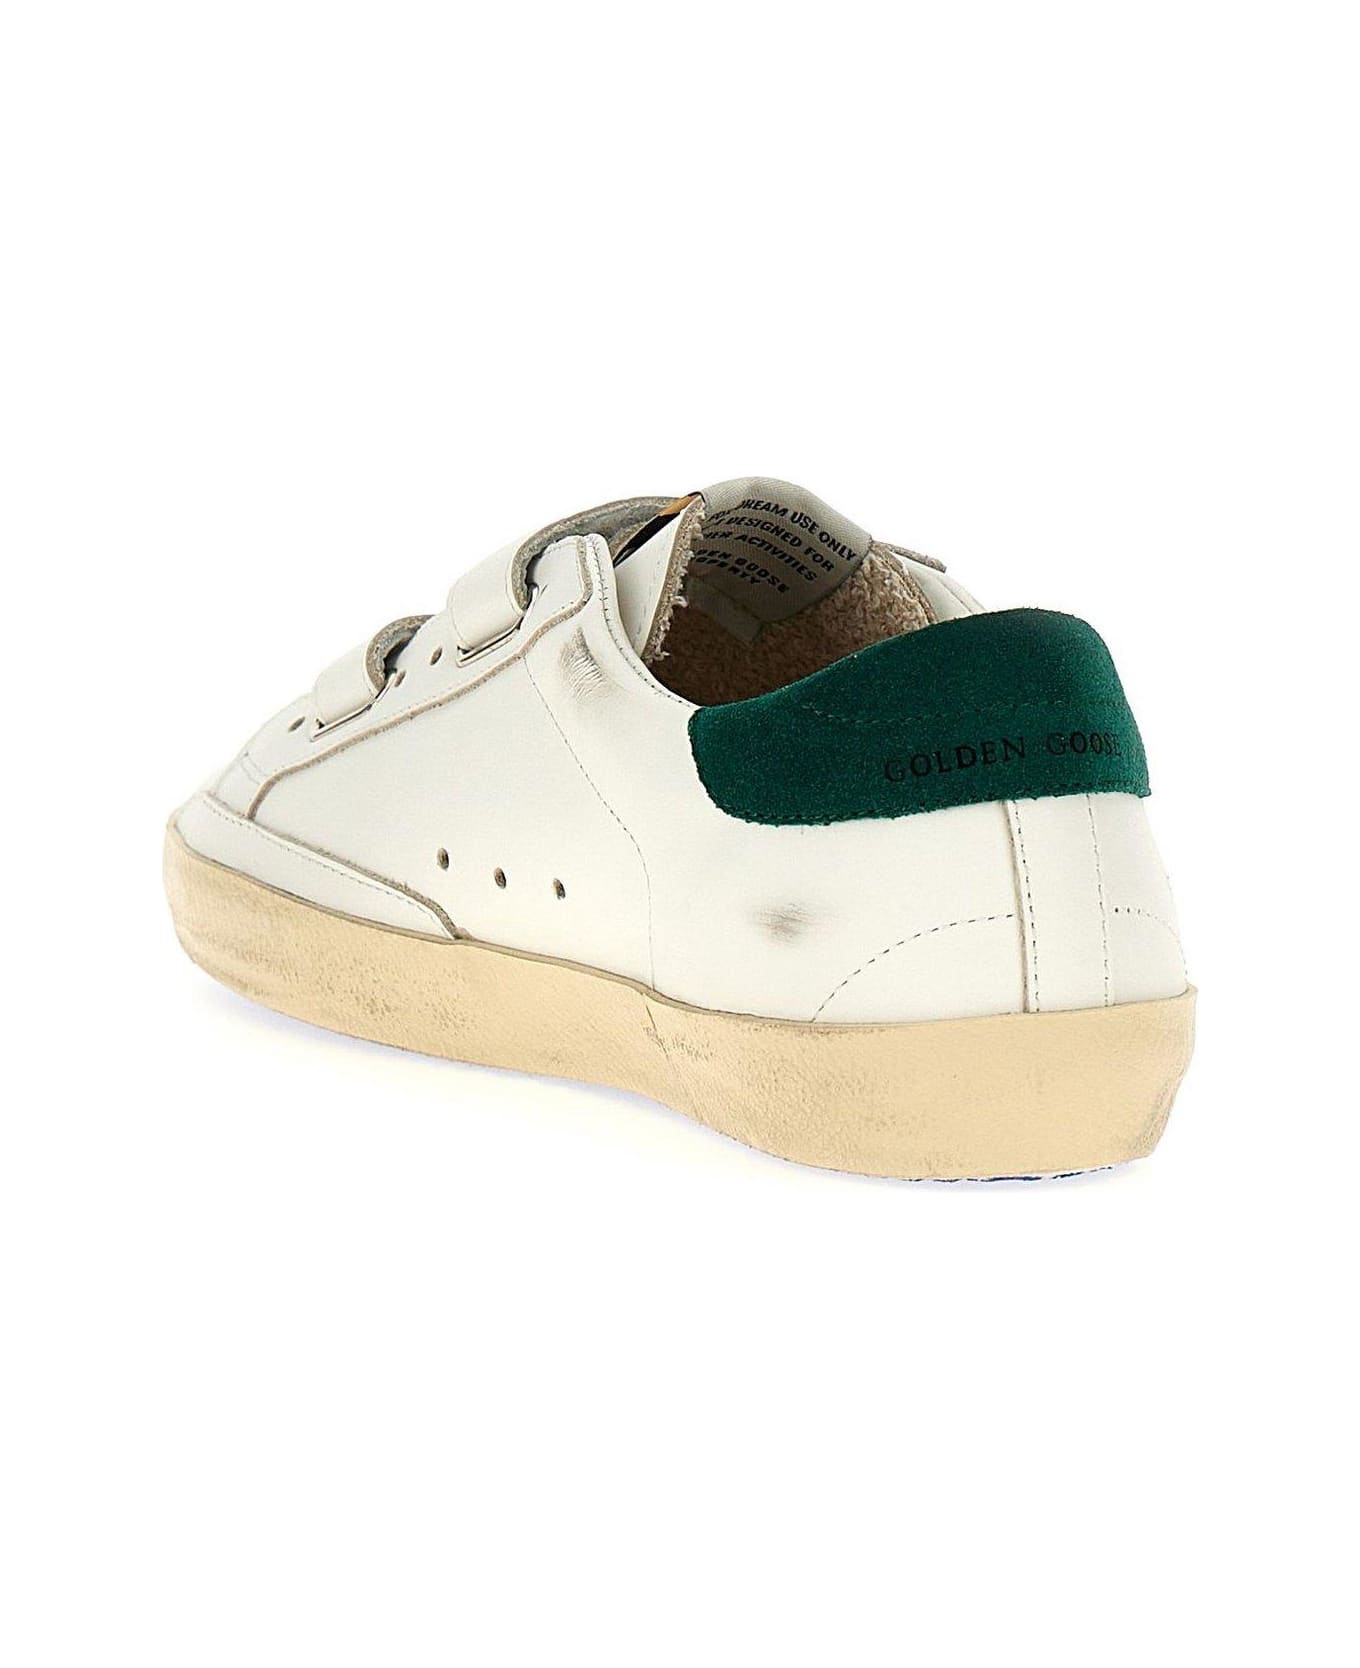 Golden Goose Old School Star Patch Sneakers - WHITE/GREEN